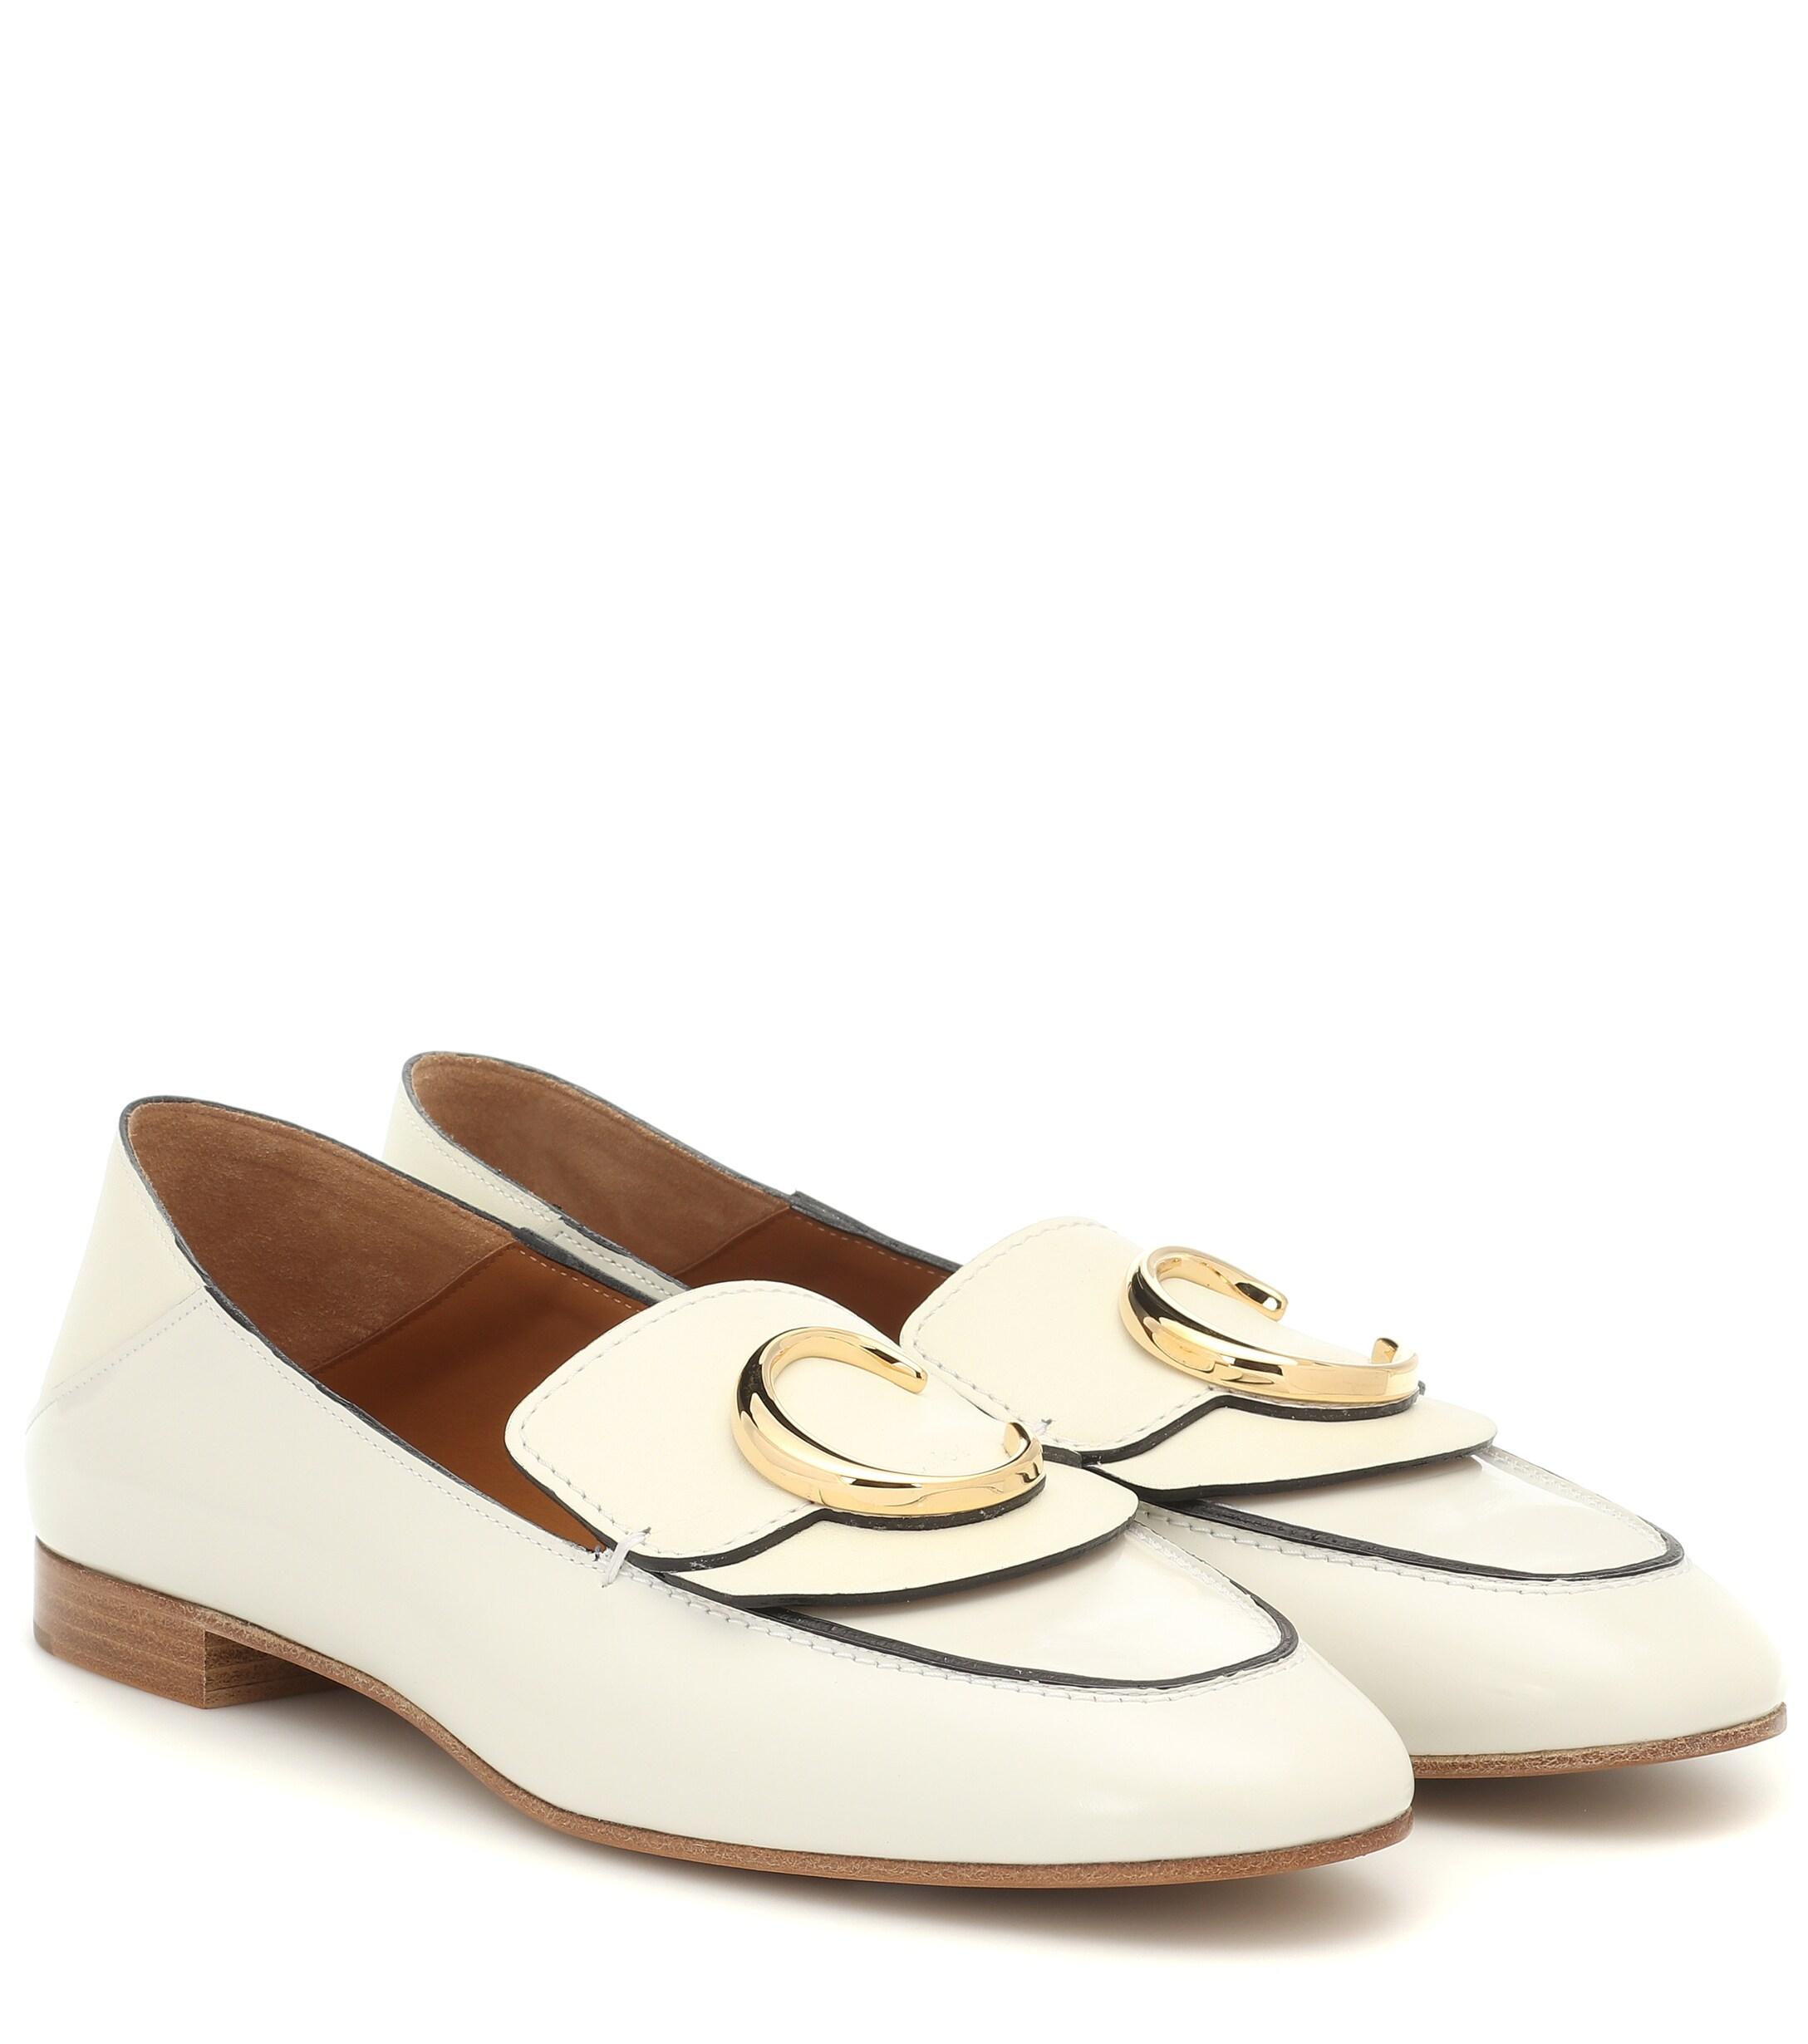 Chloé C Leather Loafers in White - Lyst